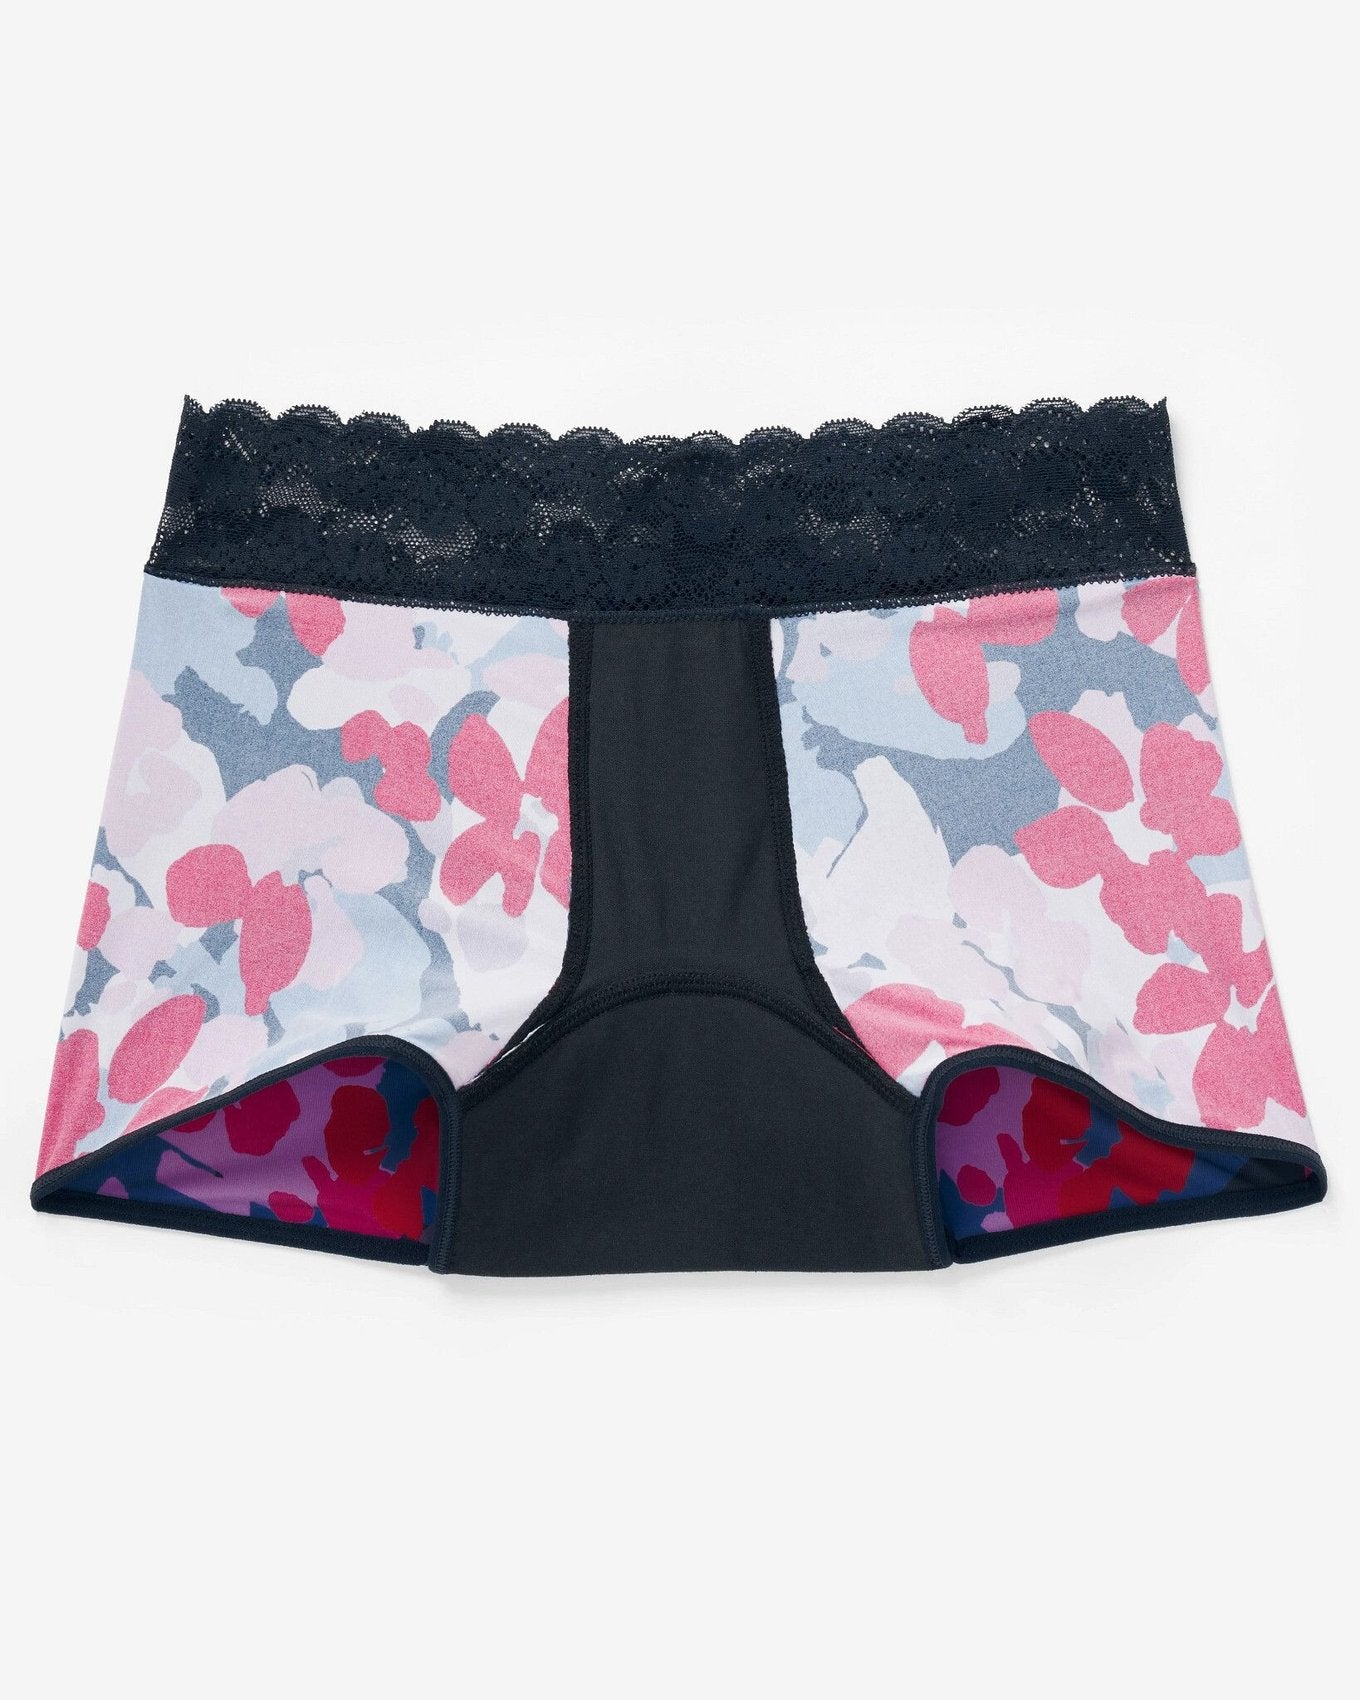 Joyja Emily period-proof panty in color Camouflower C02 and shape shortie